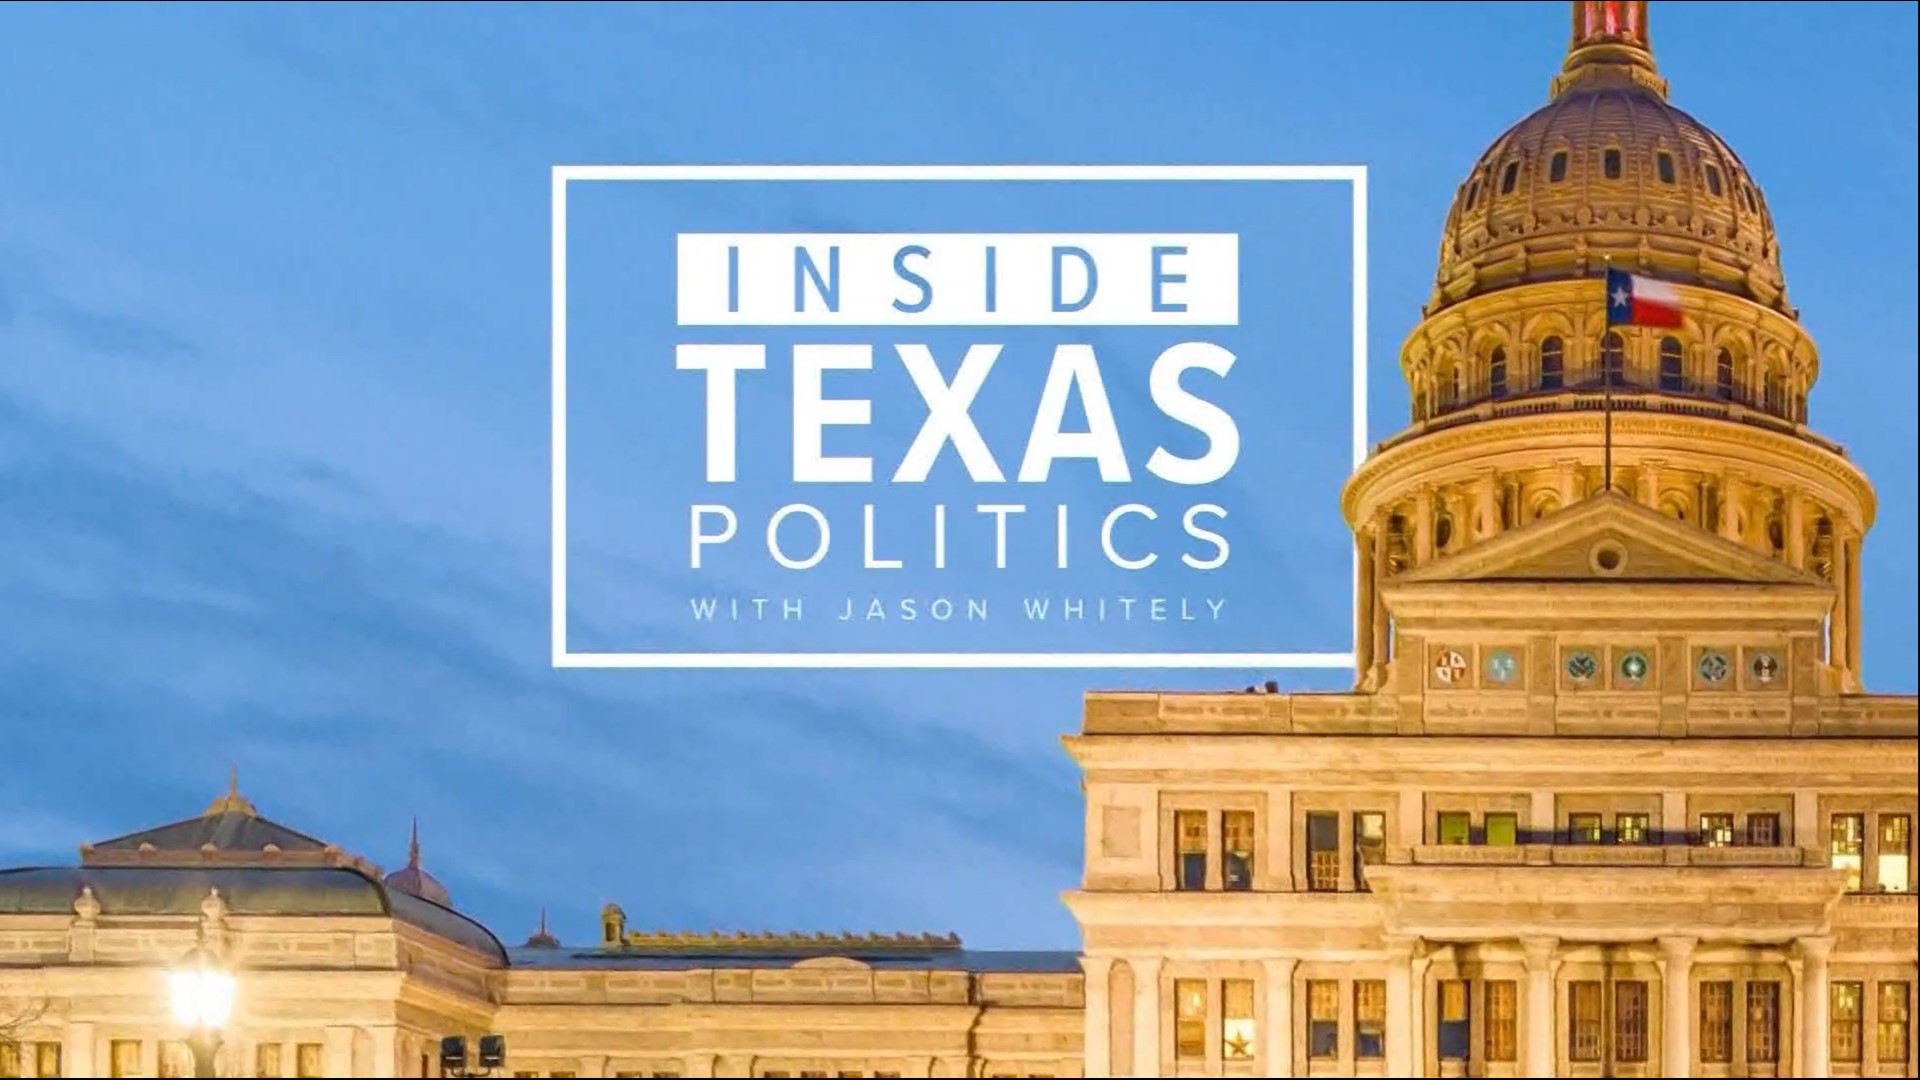 Plus: How are southern Texas counties preparing for the end of Title 42? And why are some Texas Republicans pushing to eliminate countywide voting centers?